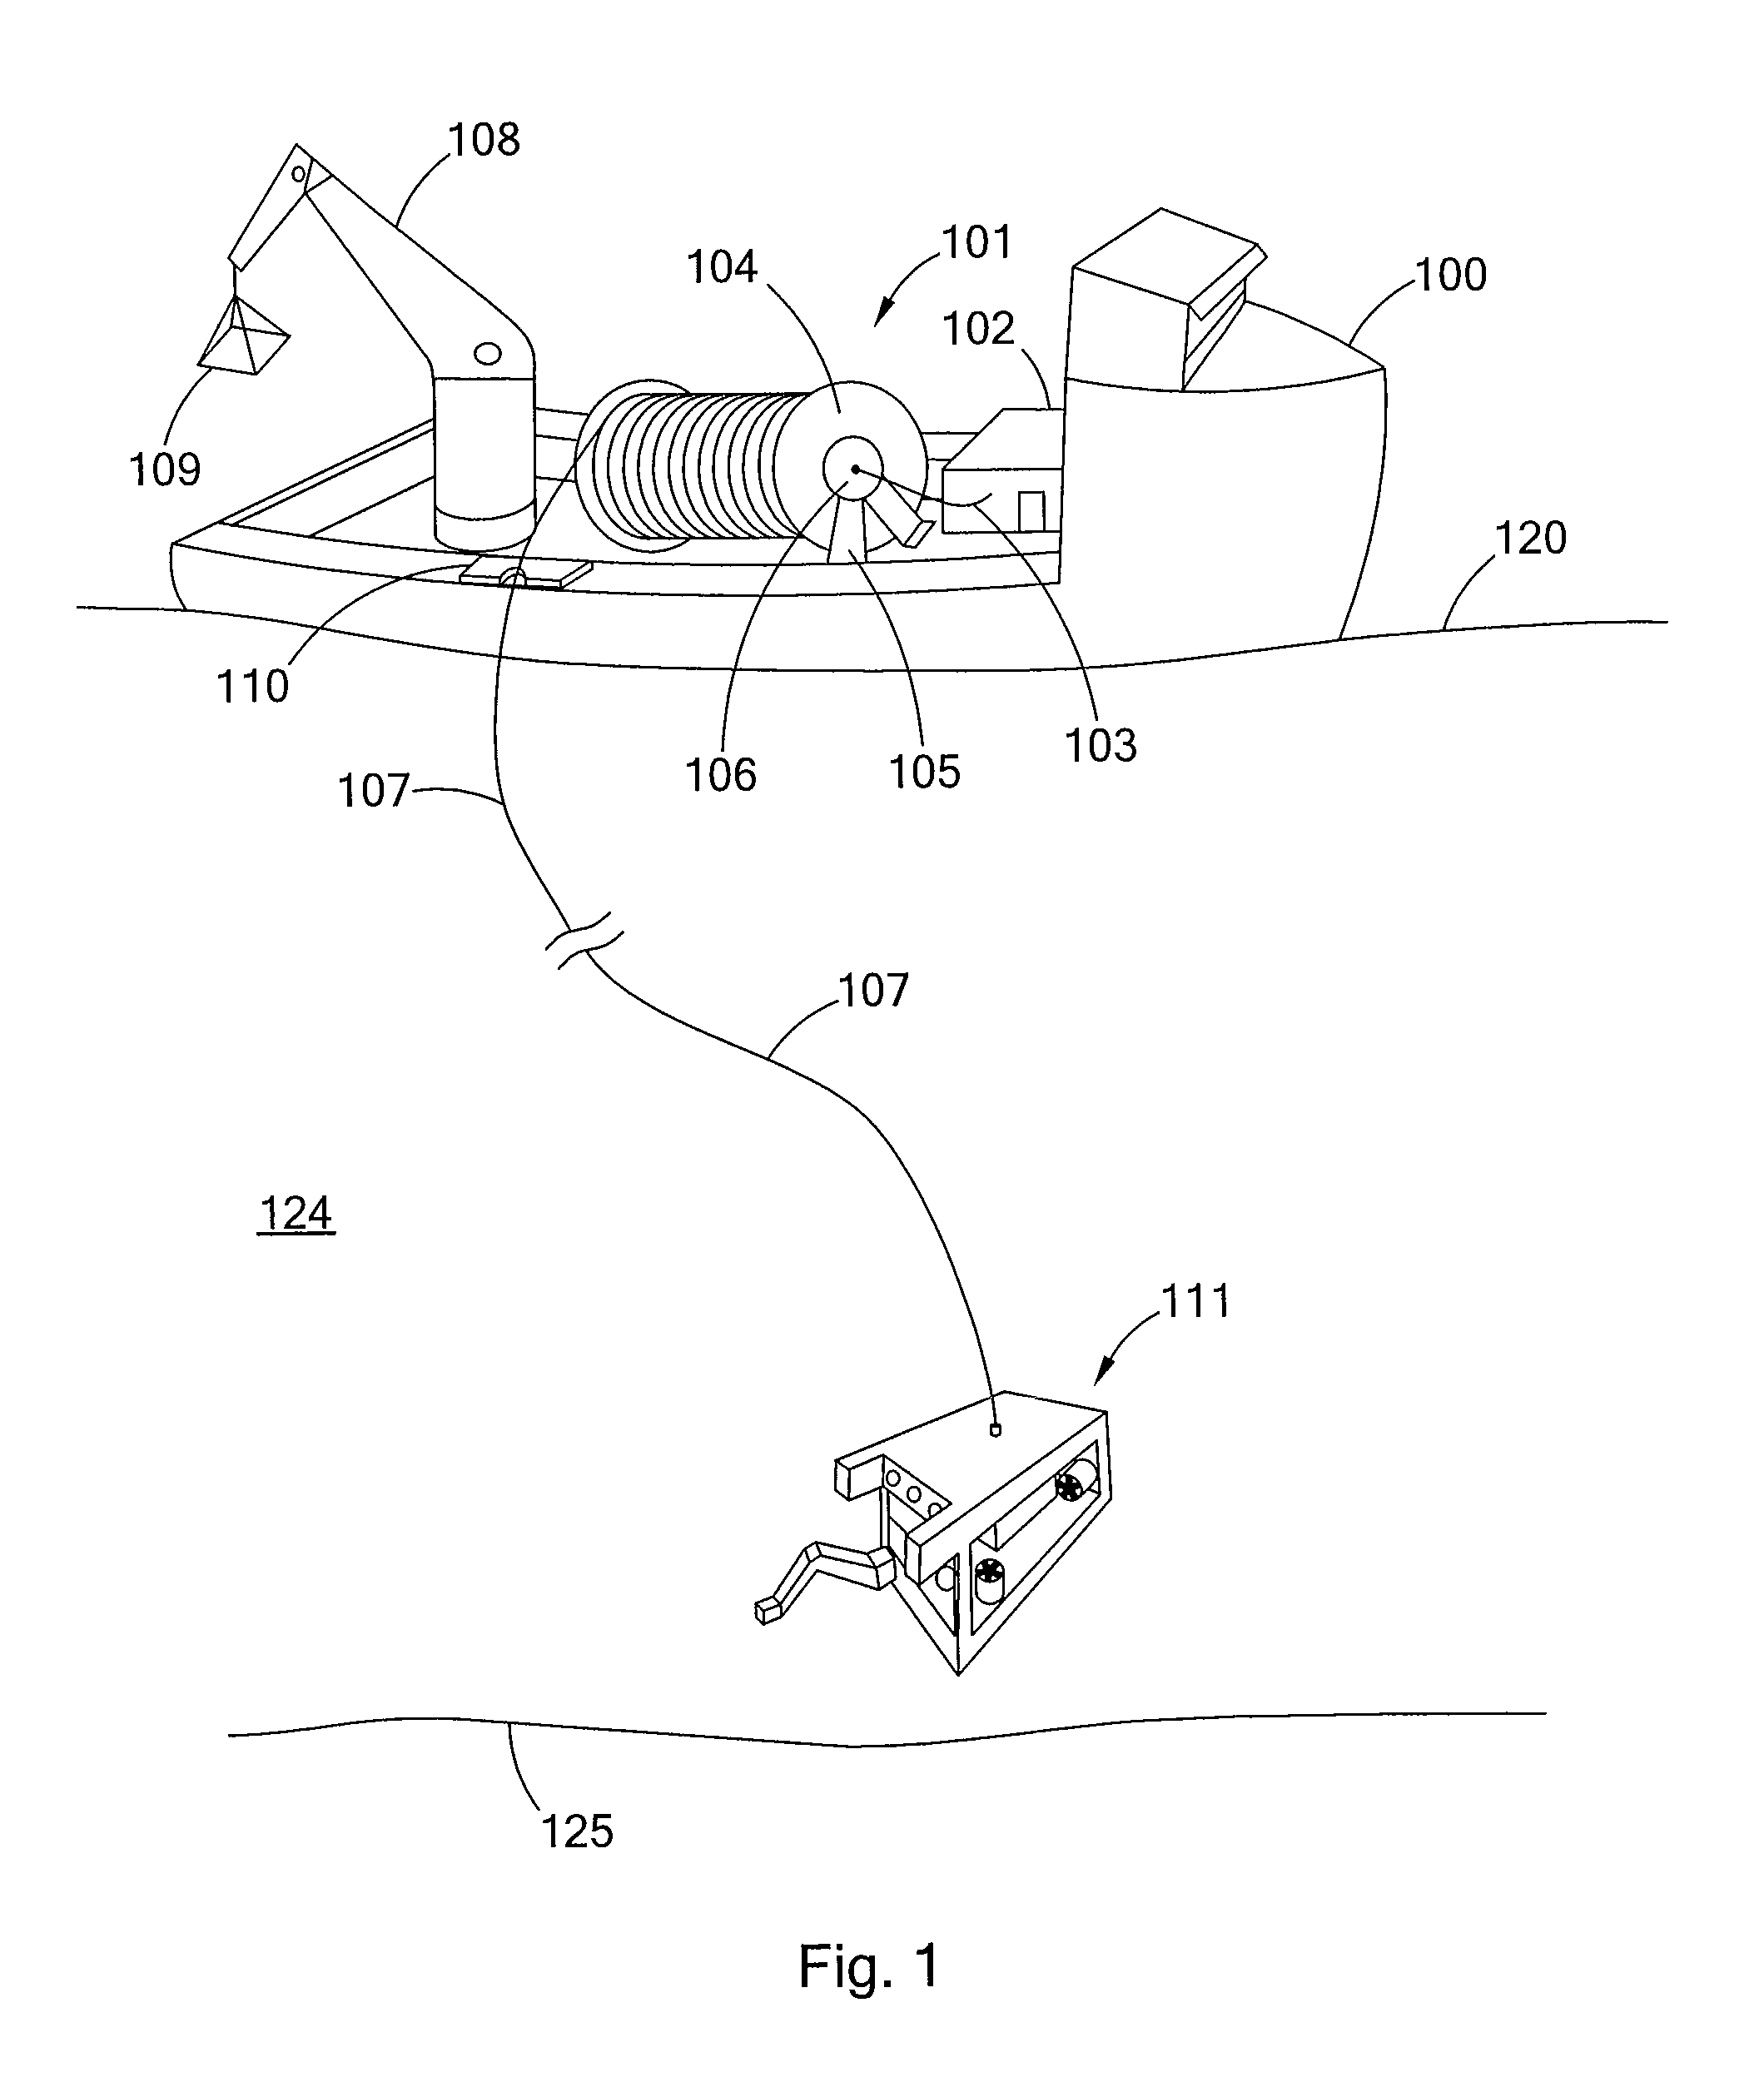 High power laser photo-conversion assemblies, apparatuses and methods of use